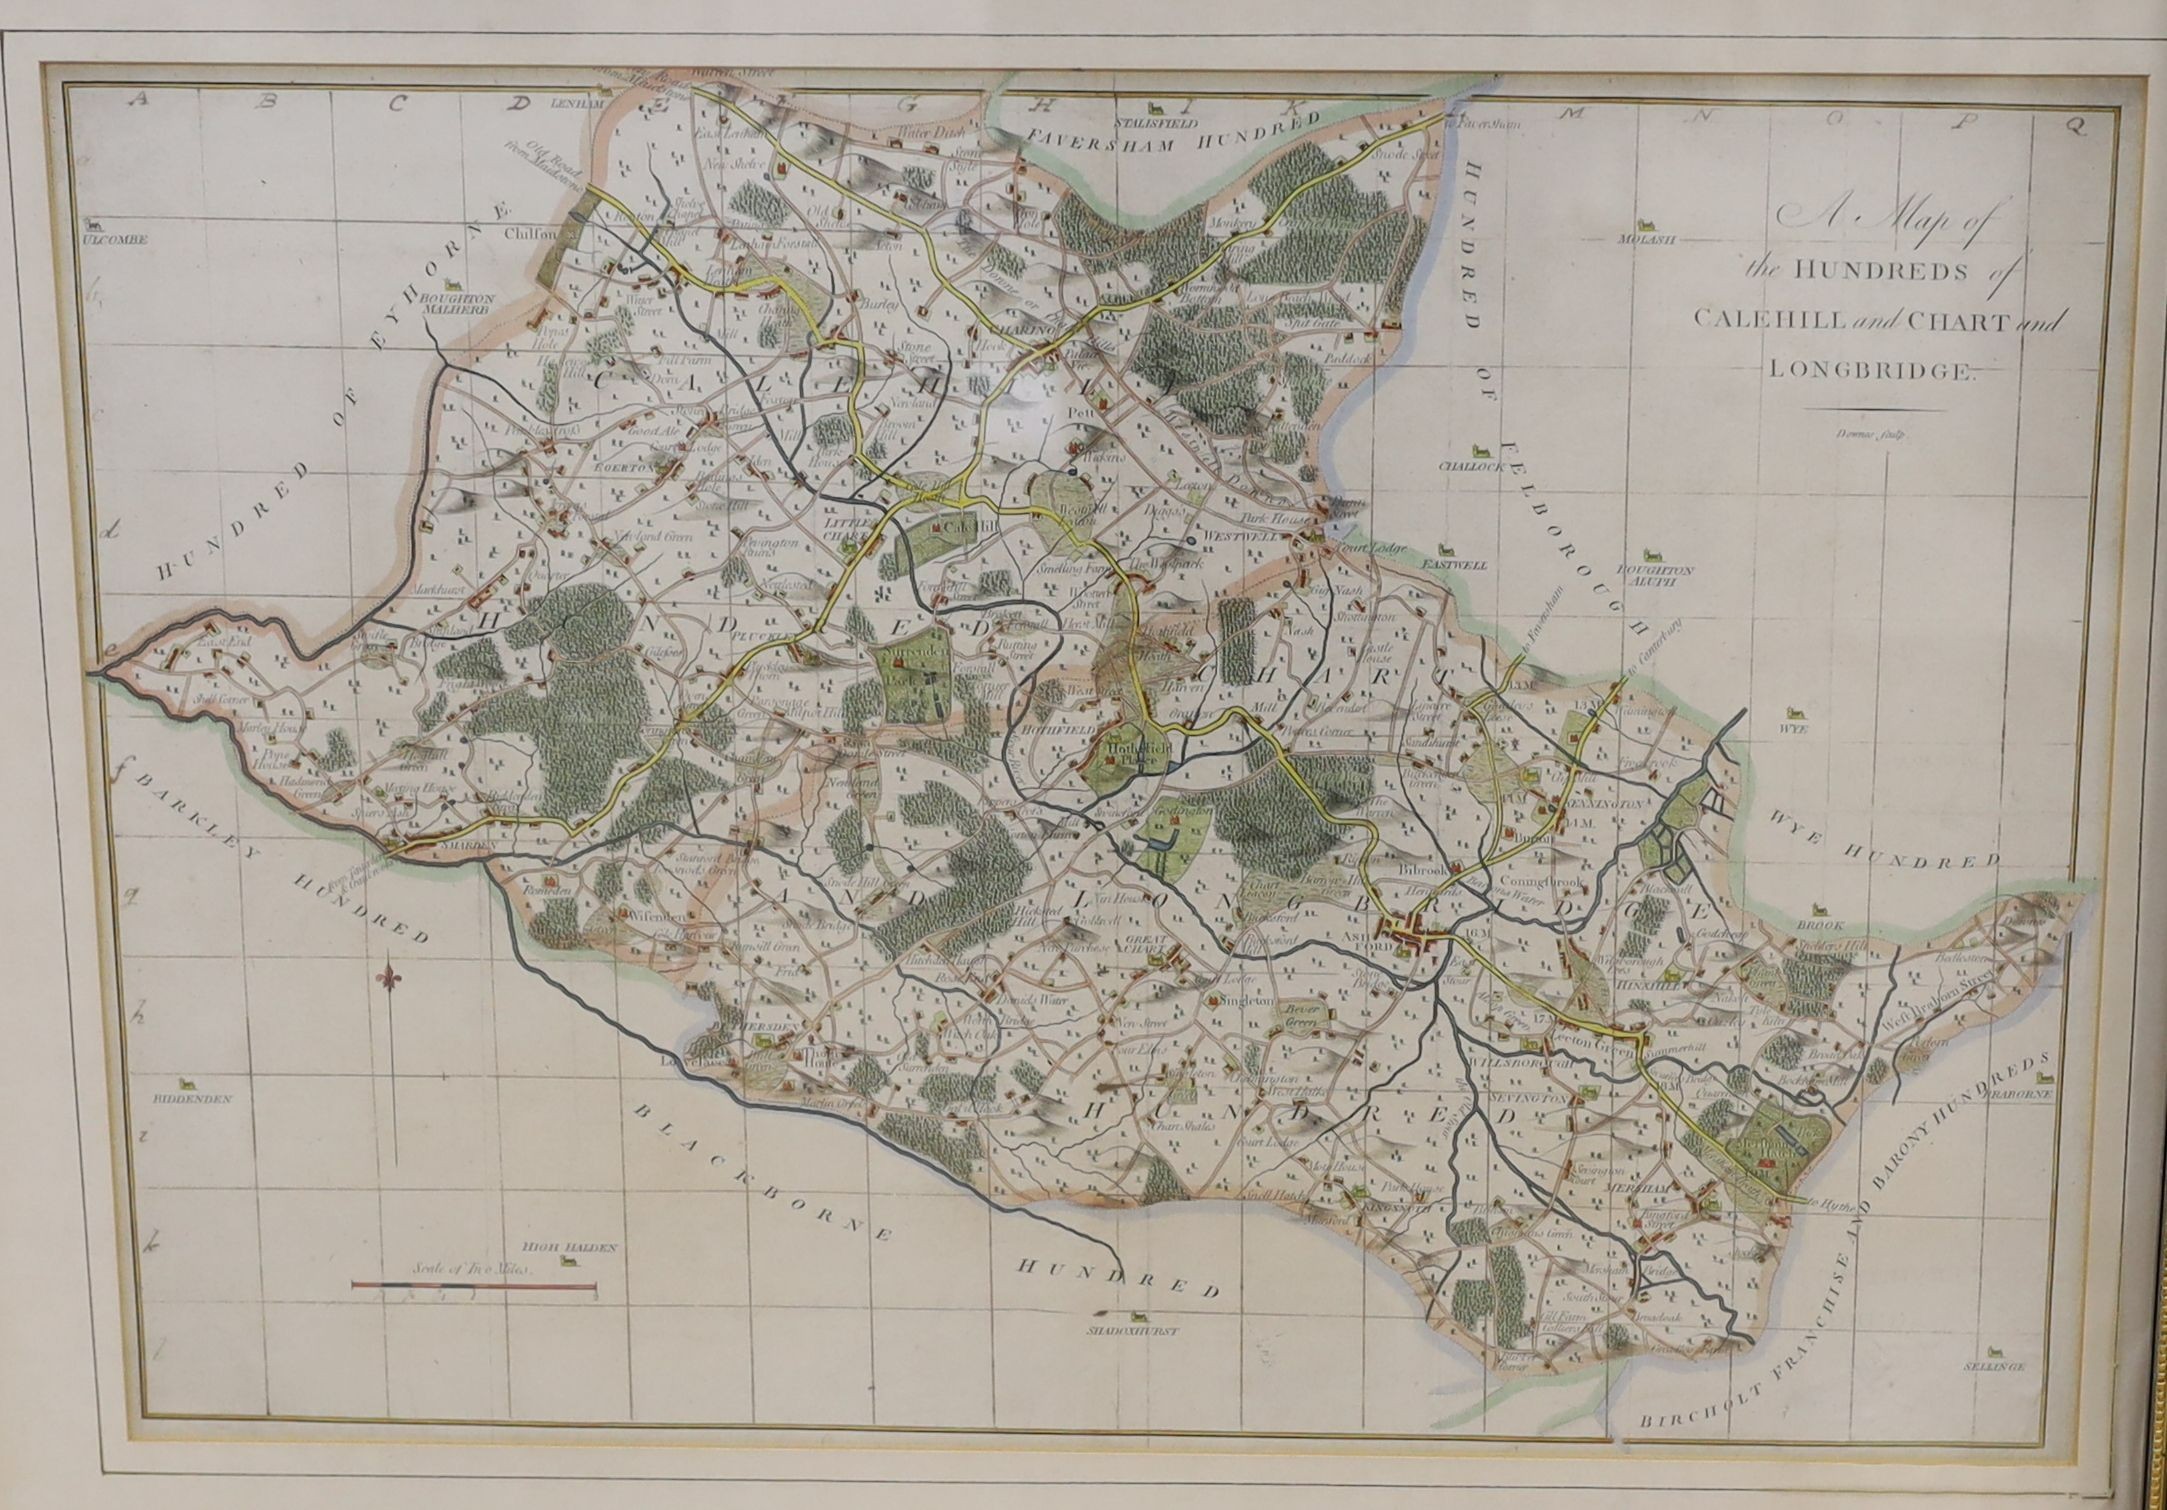 Two 19th century hand coloured steel engraved maps, The Hundreds of Tenterden, Blackborne, Oxney and Ham, and The Hundreds of Cale Hill and Chart and Longbridge, largest 46 x 38cm, with a reprinted map of Sussex